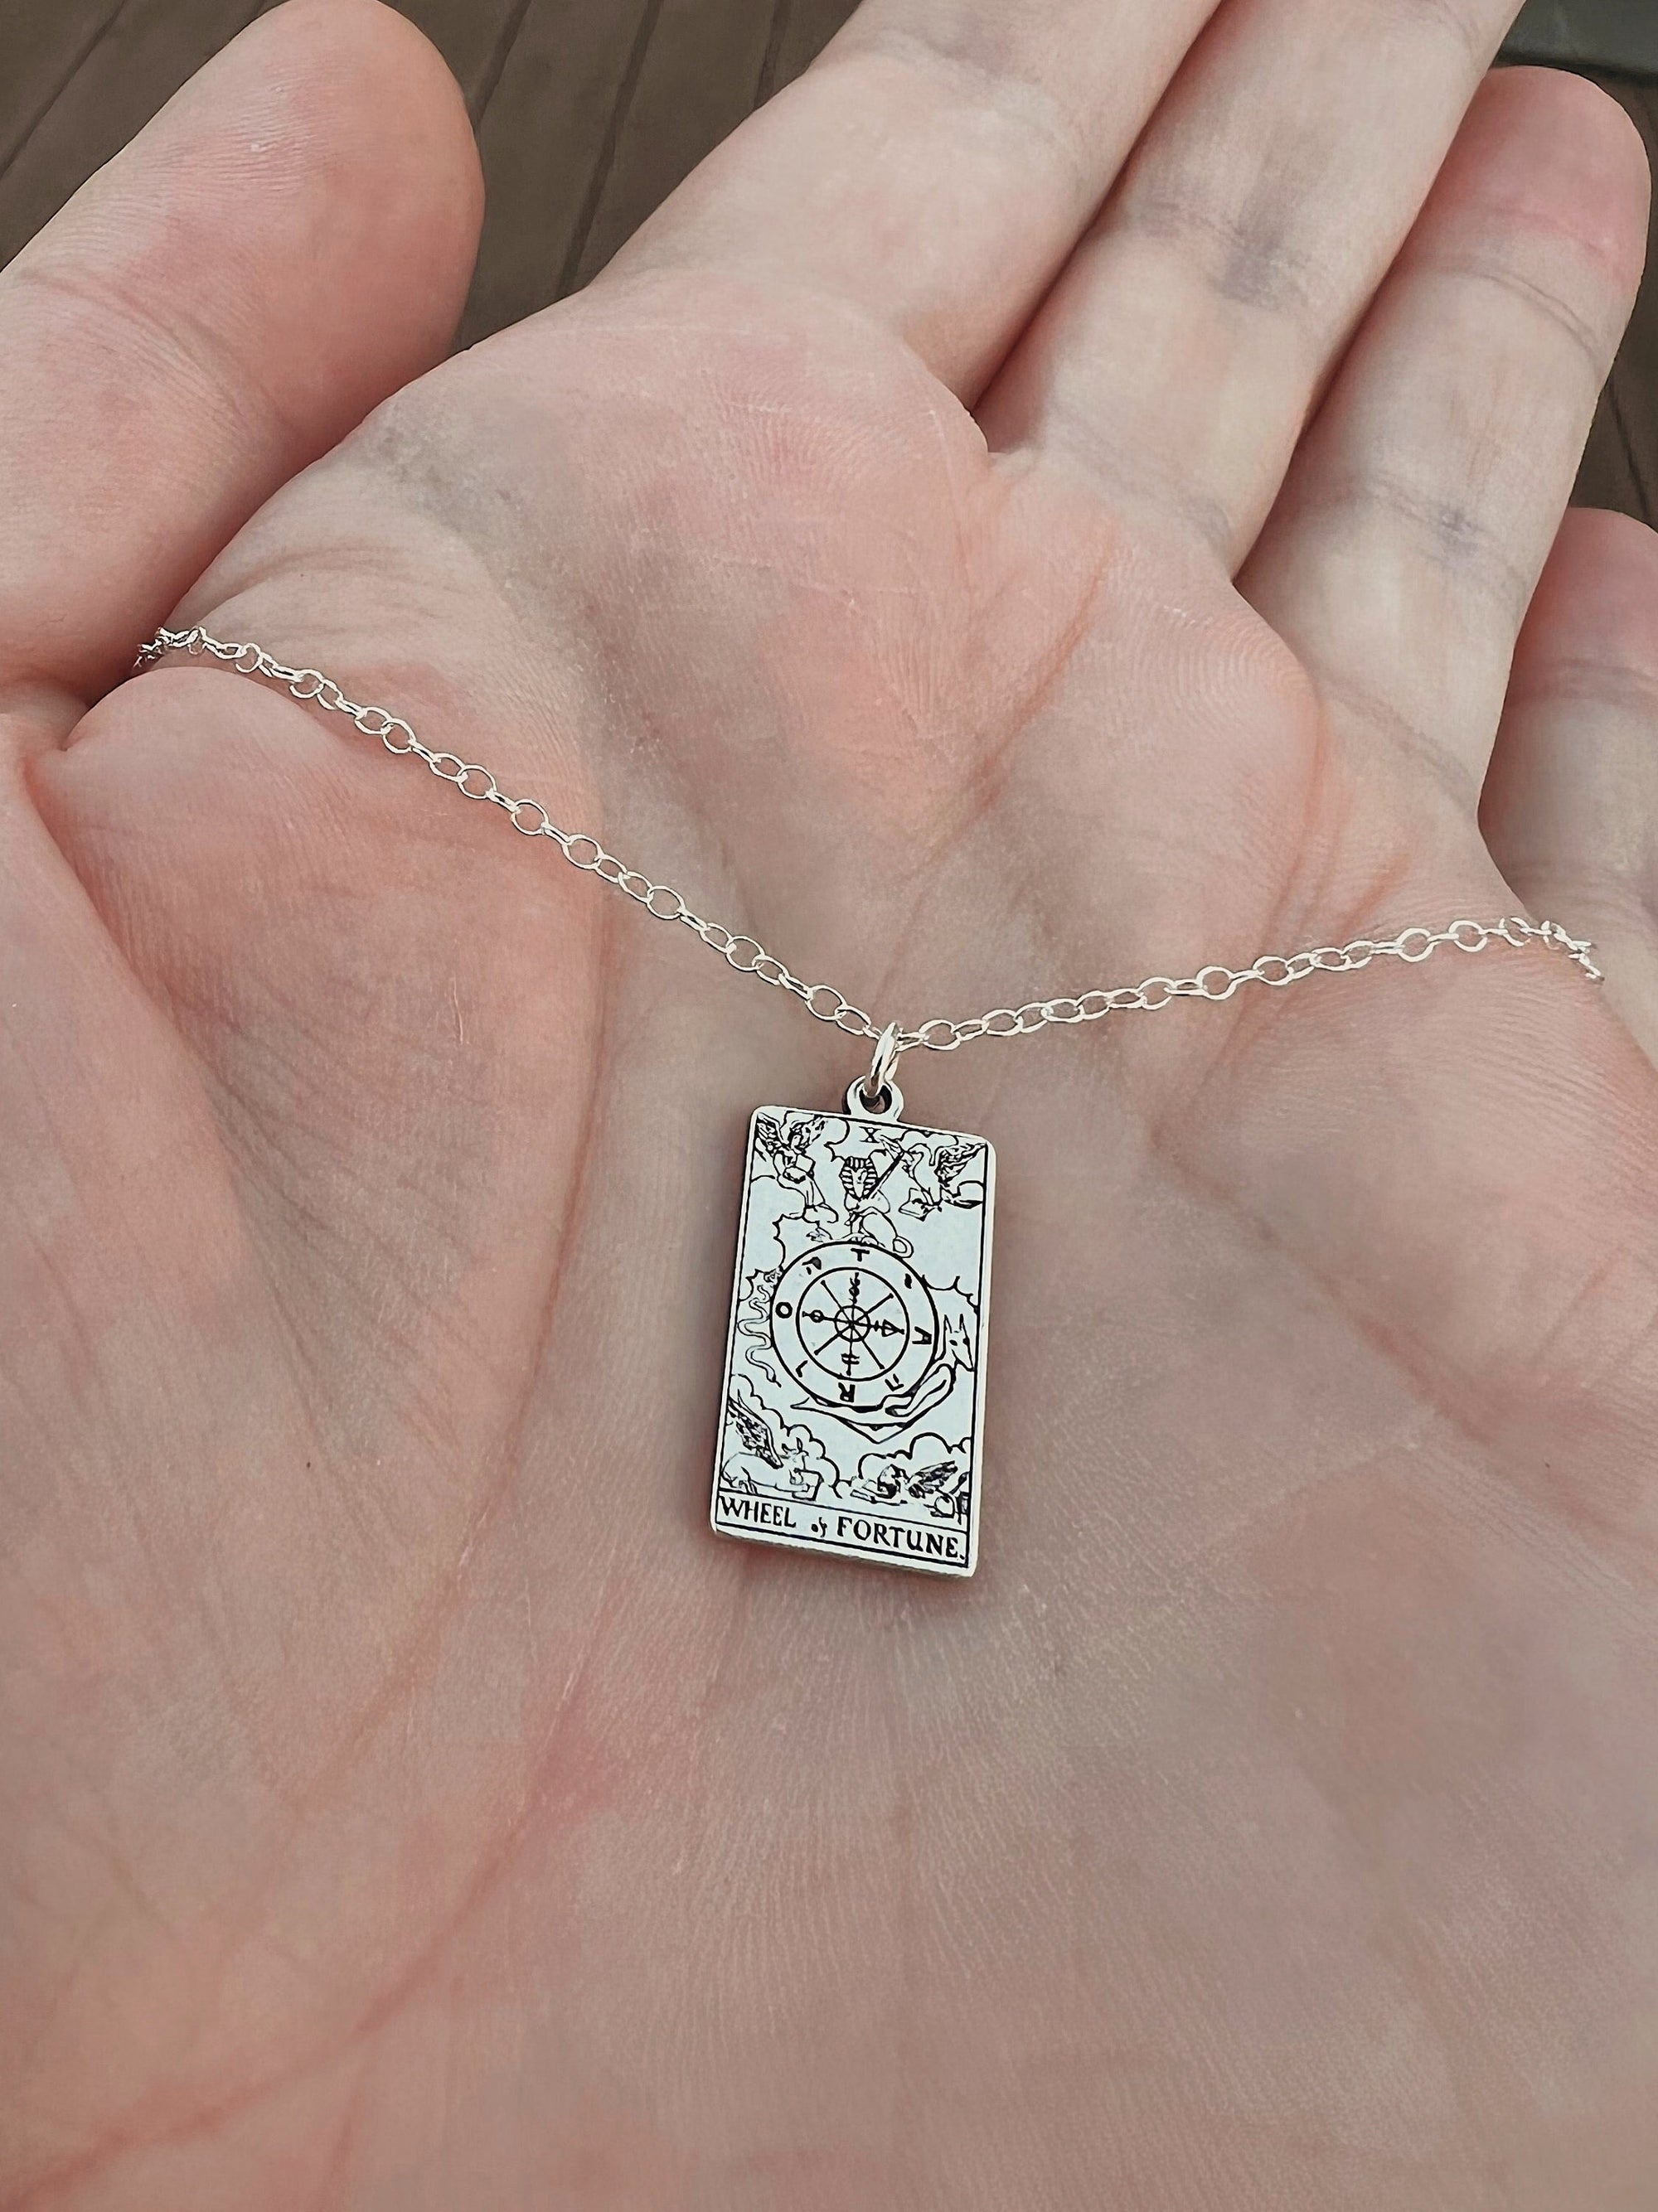 Wheel of Fortune Tarot Card Necklace - Sterling Silver